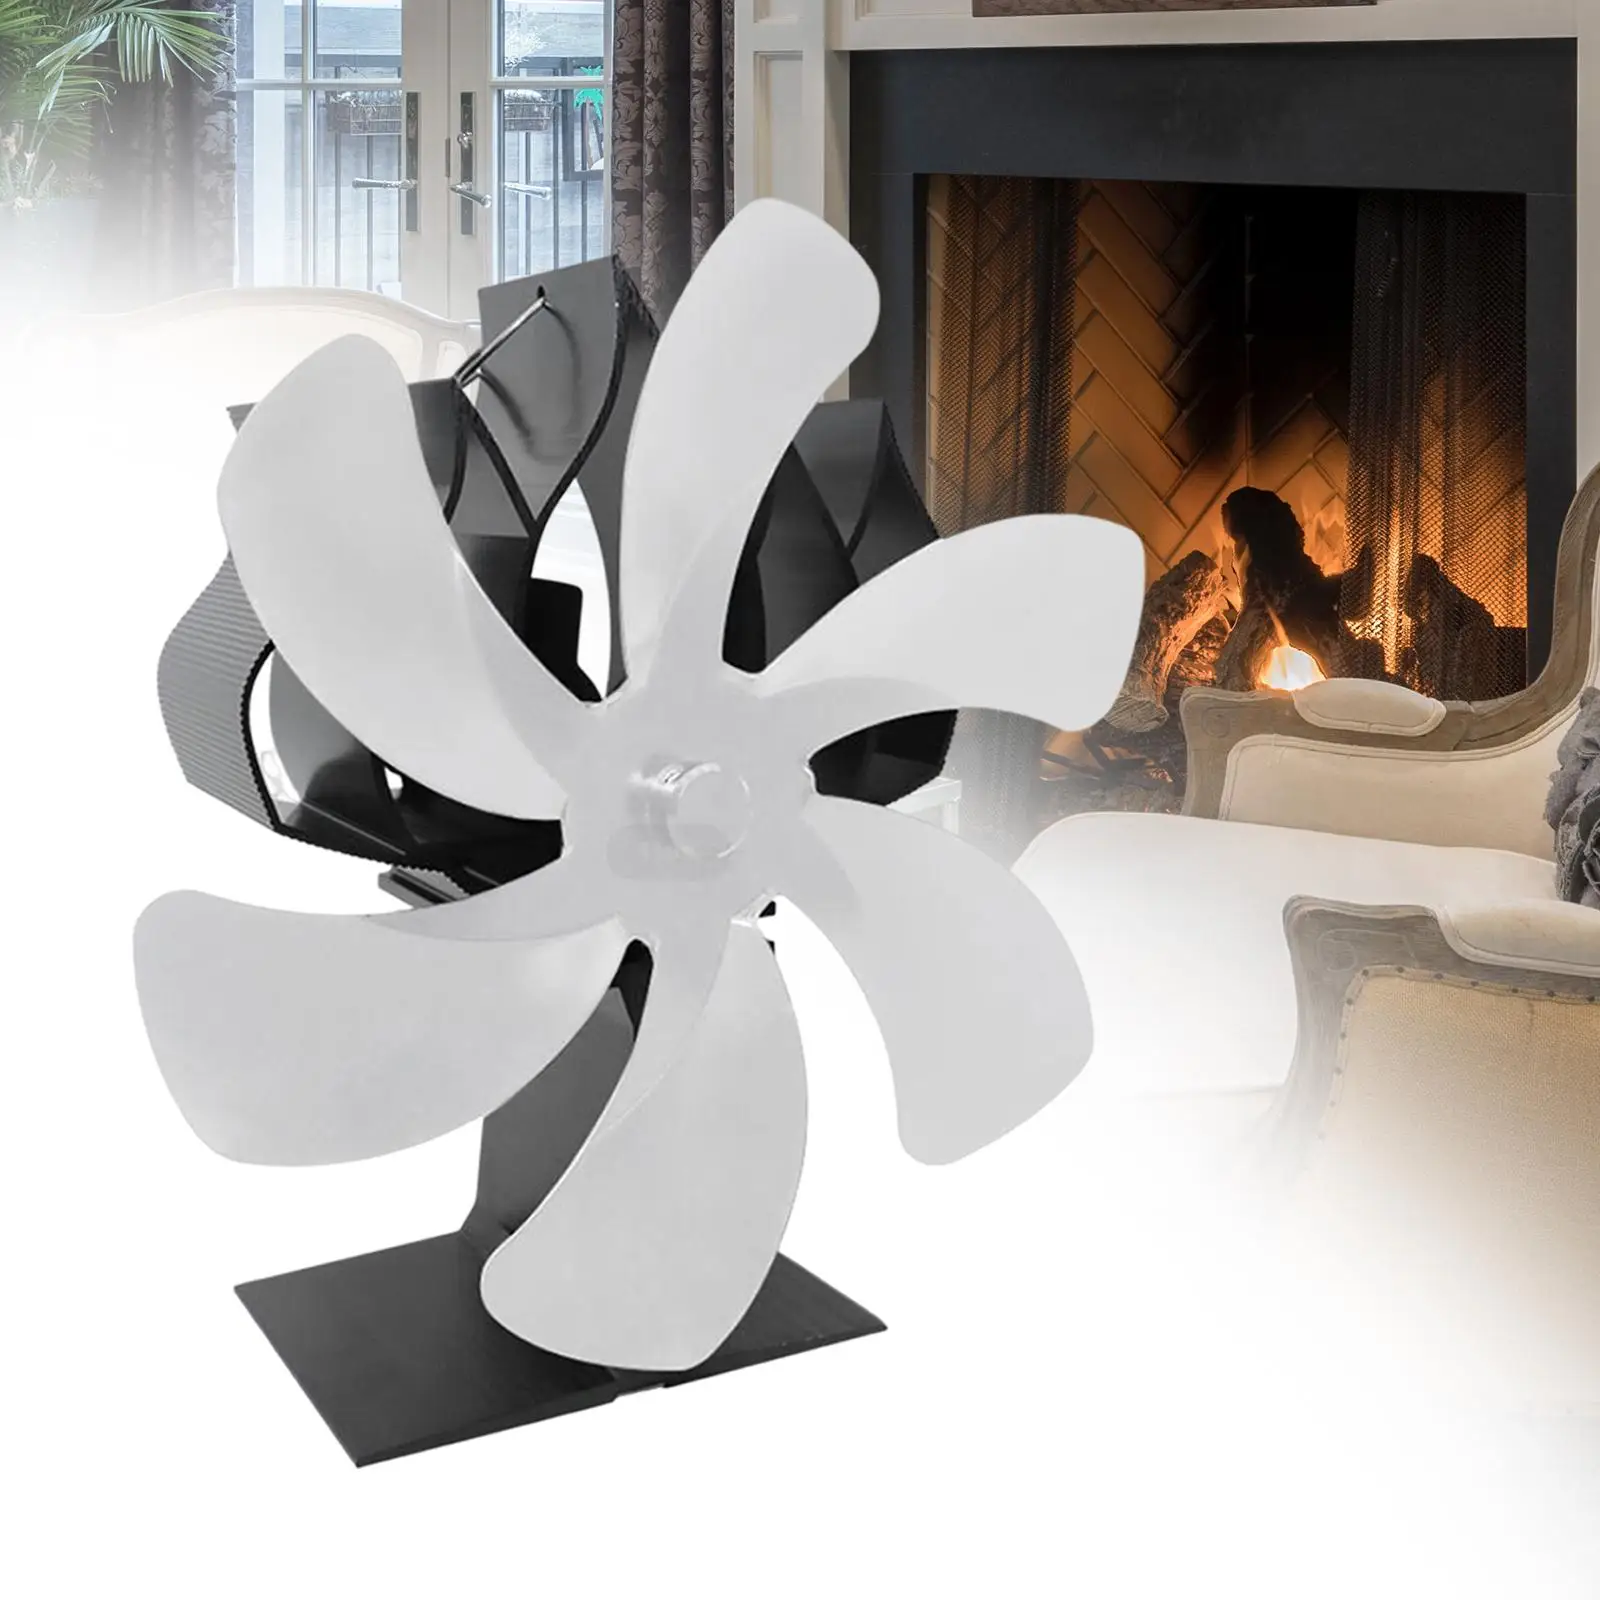 Hot Powered Fan Less Consumption Low Noise Fireplace Fan for Bedroom